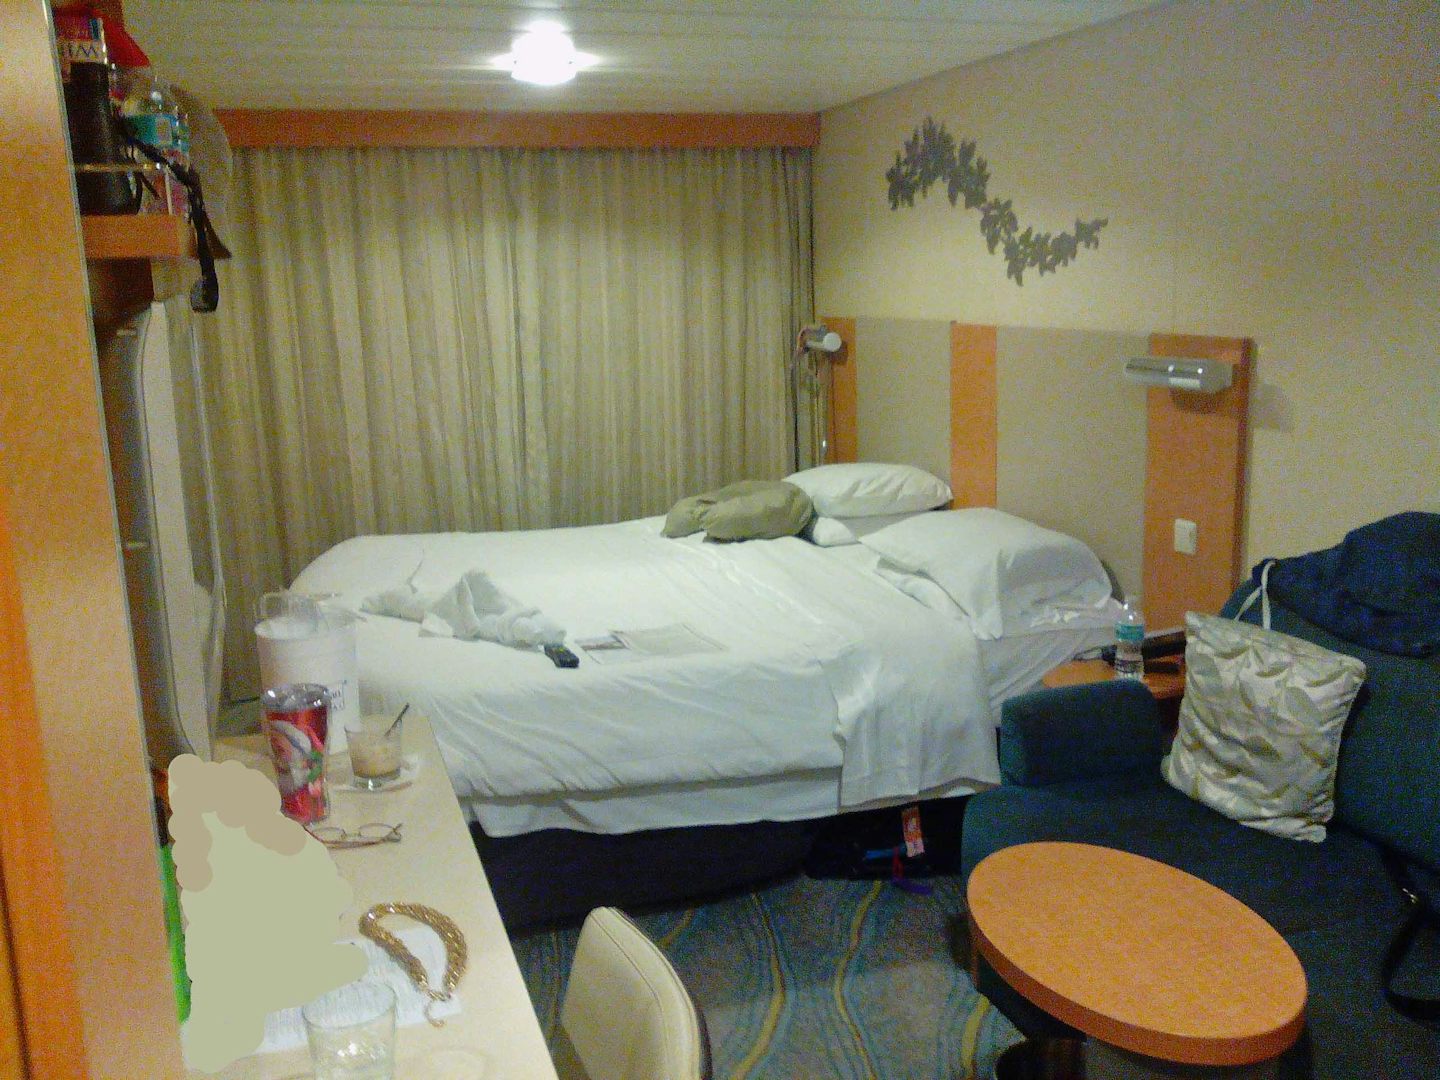 Excuse the mess.  This room was very nice.  Would stay in it again.  Bed ve